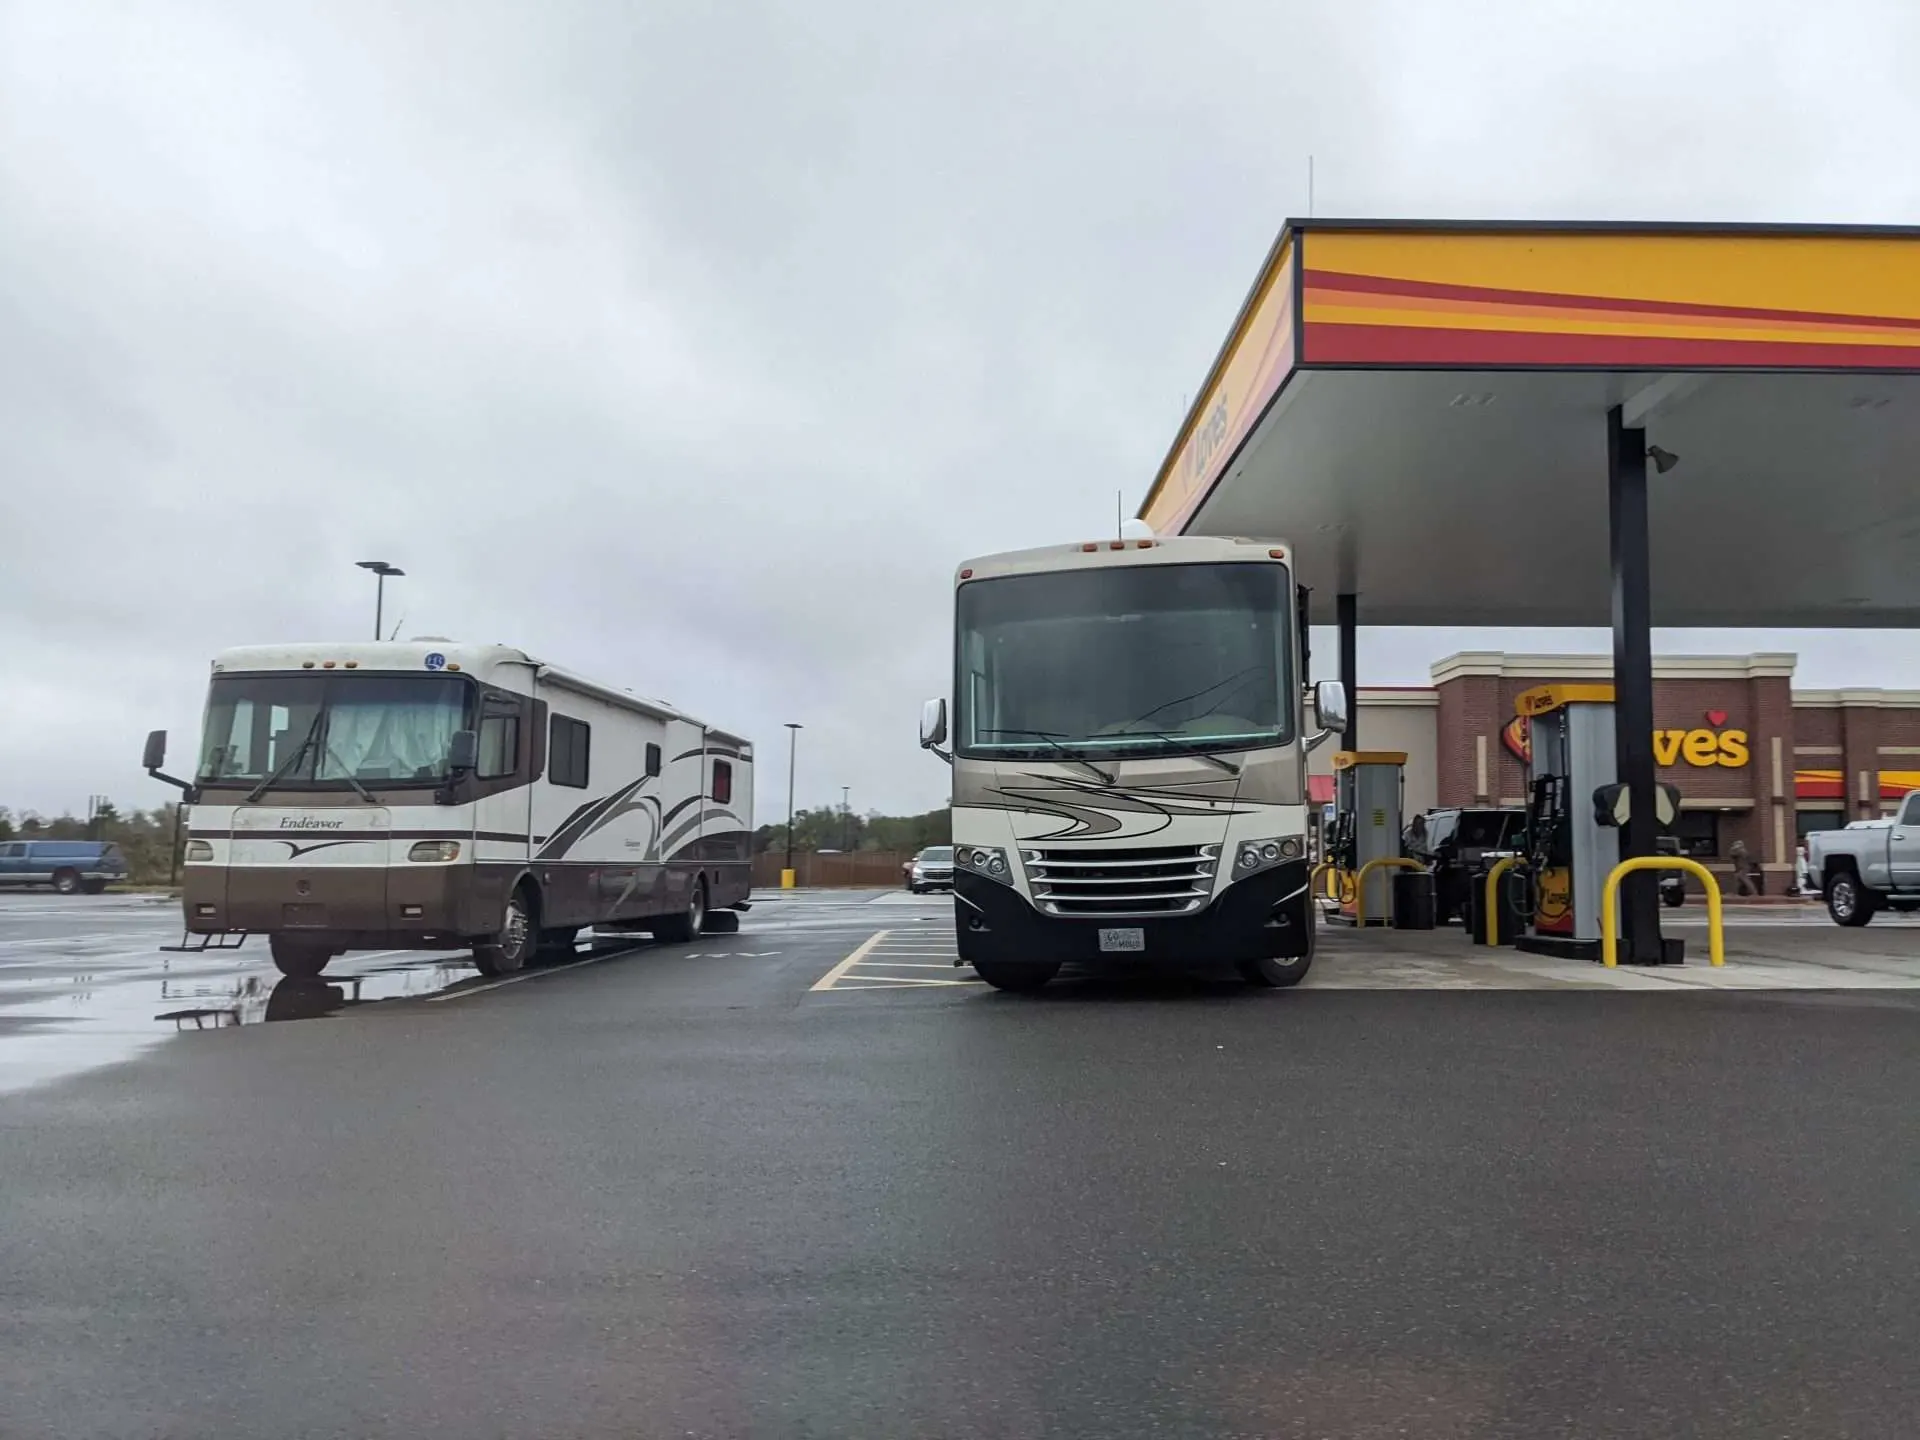 RVs parked at Love's truck stop